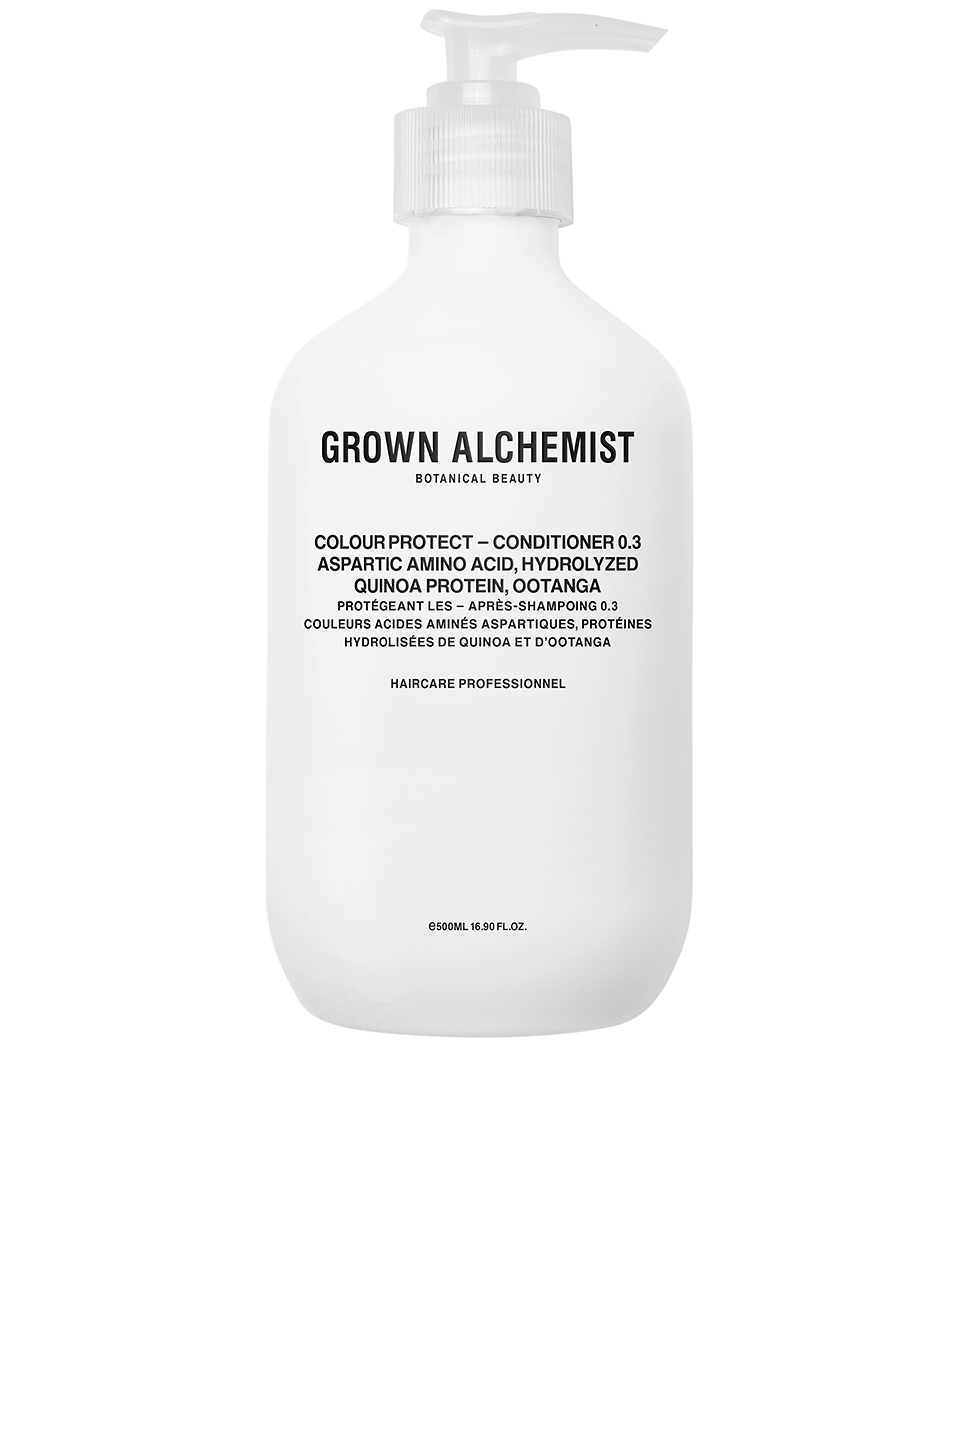 Grown Alchemist Colour-Protect Conditioner 0.3 in Aspartic Amino Acid & Hydrolyzed Quinoa Protein & Ootange